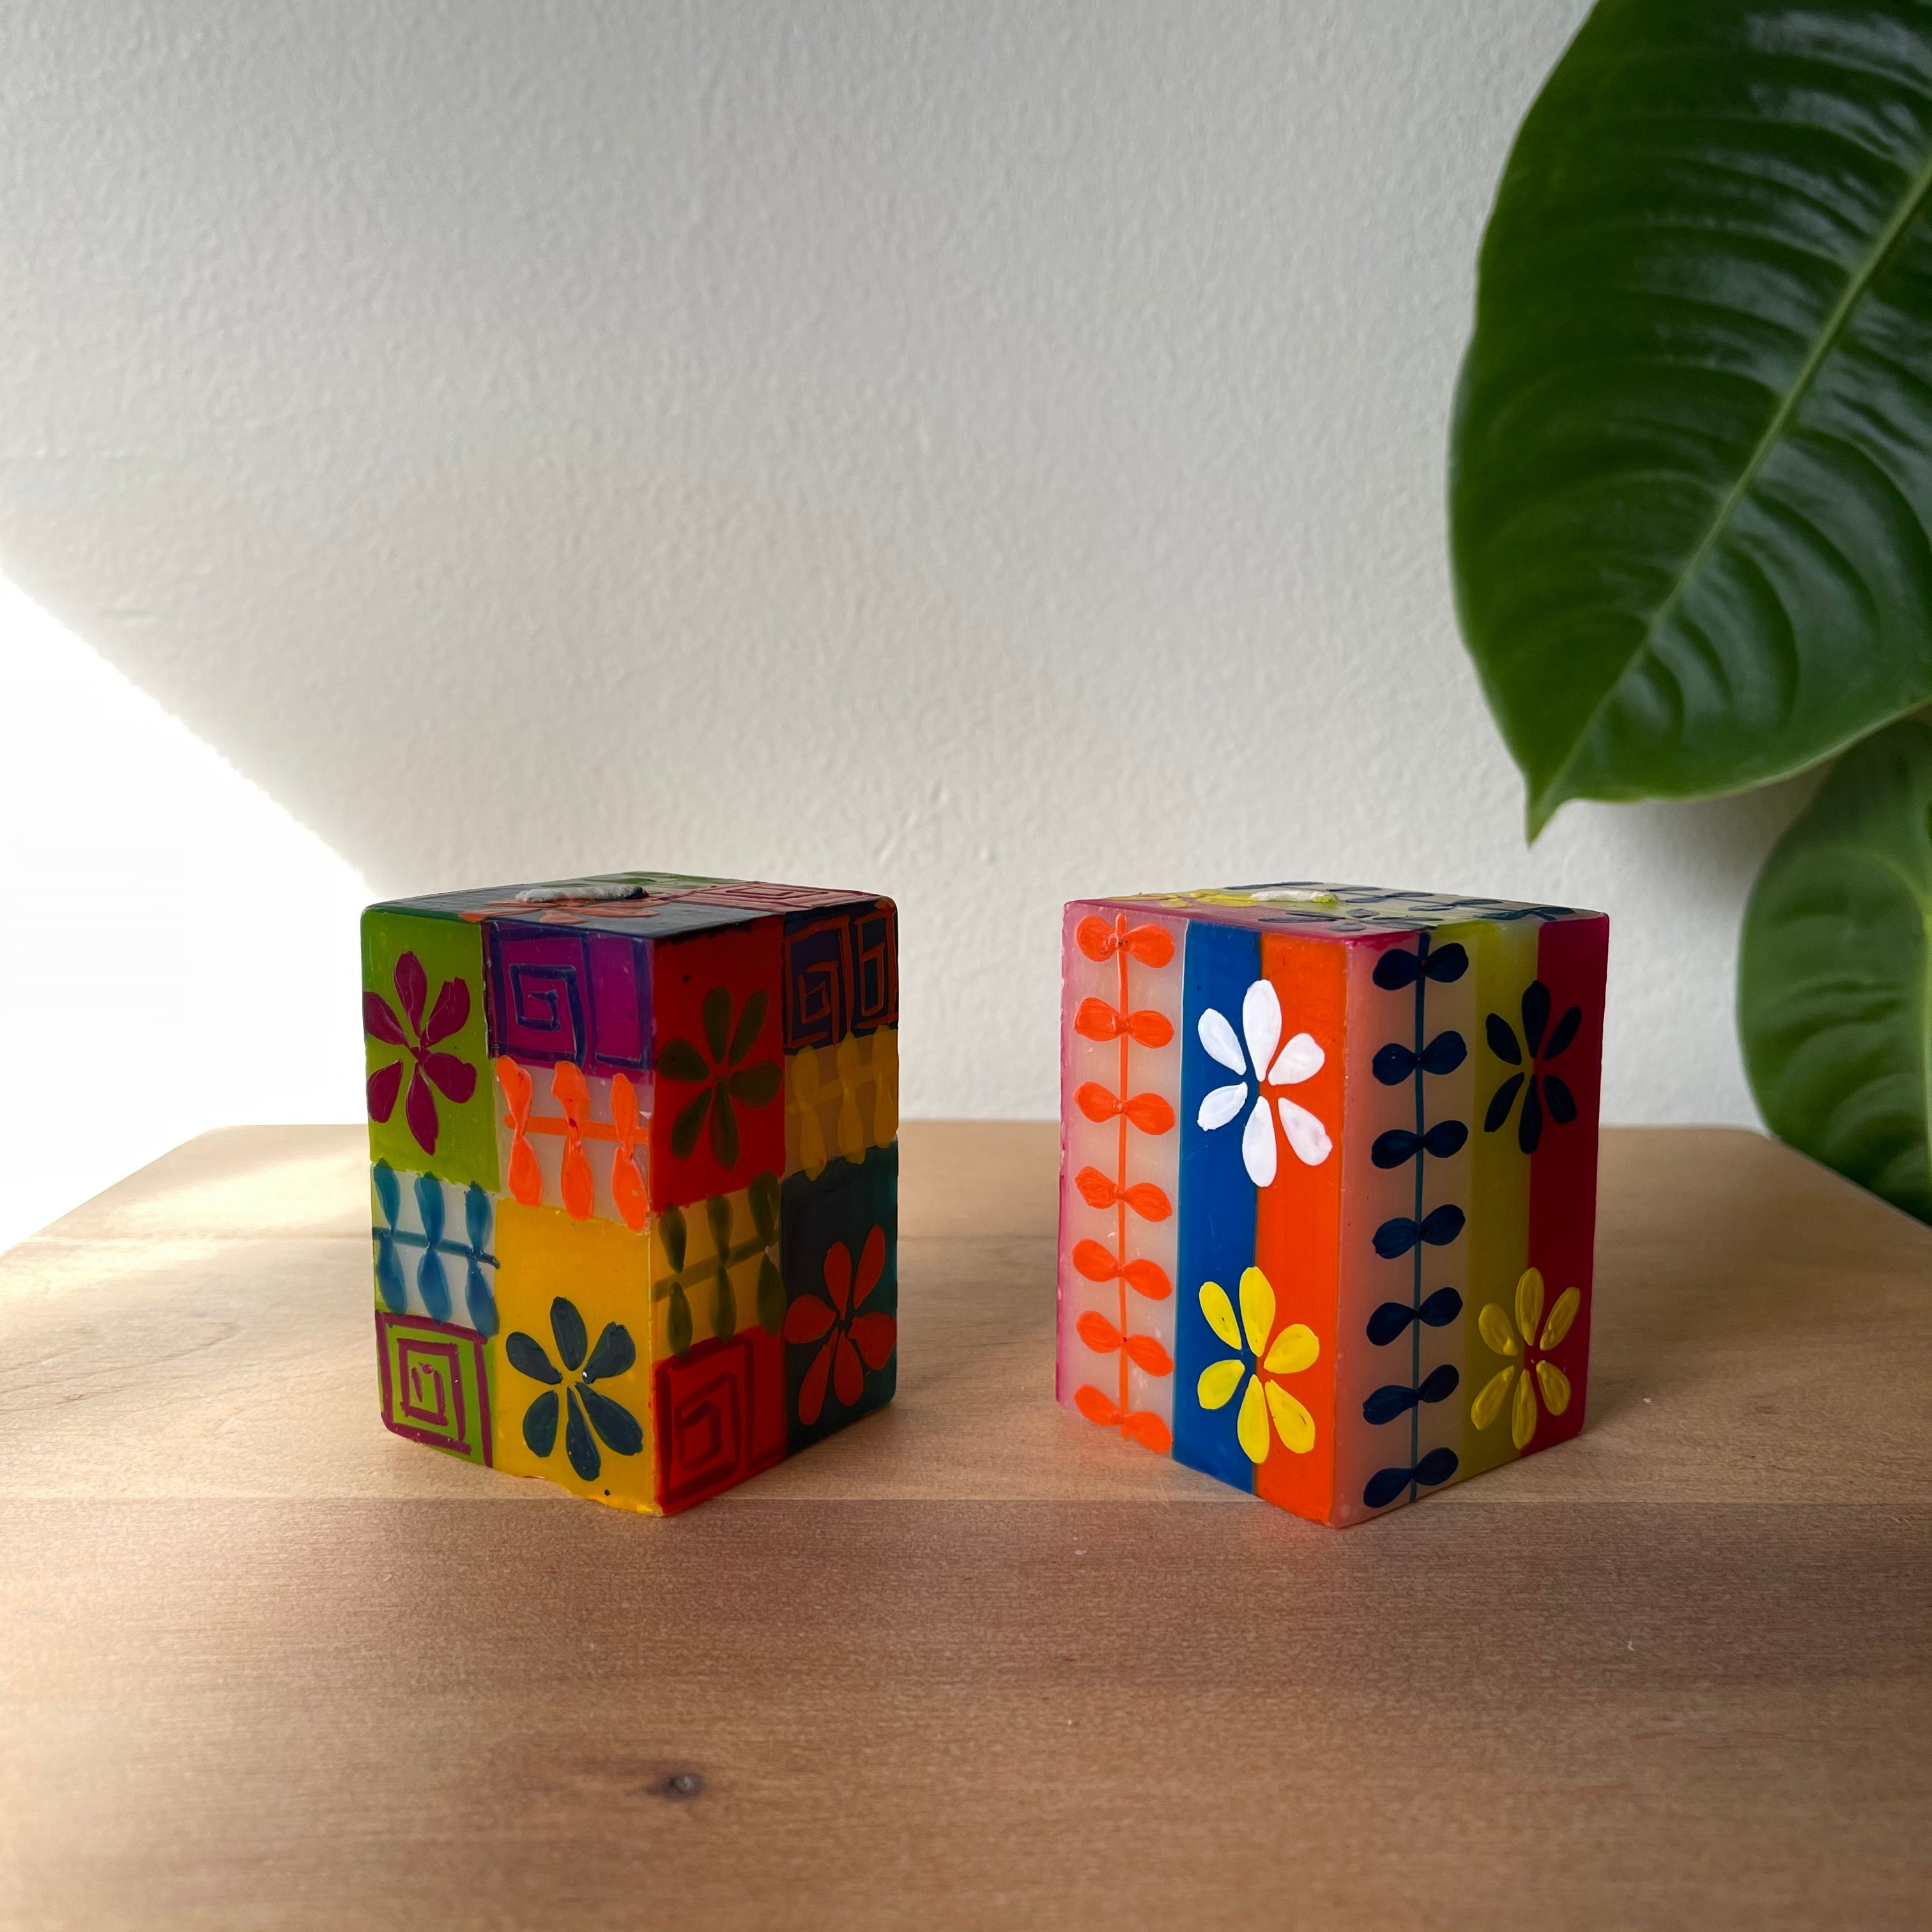 Two Summer hand painted cube candles. Colorful with a background of greens, orange, read, and blue with white summer flowers, dots & designs. 